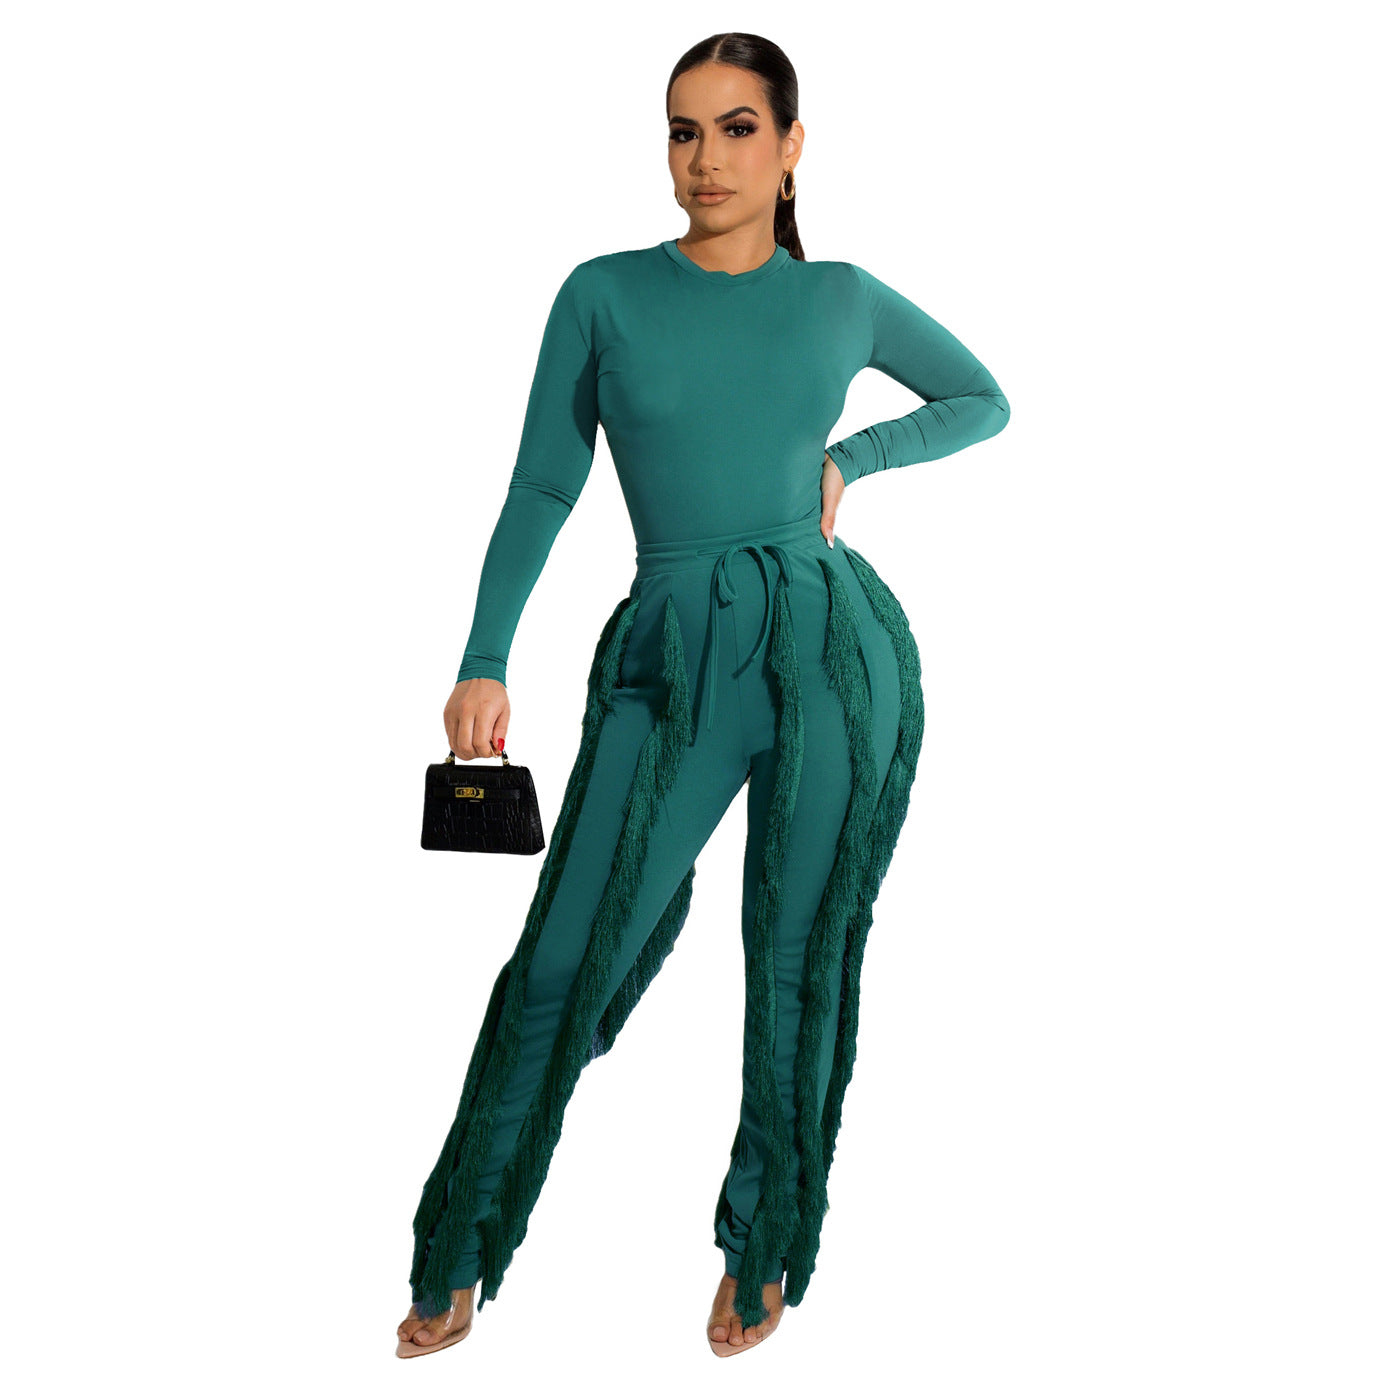 Tassel Two-piece Pants Outfit (8 Colors)